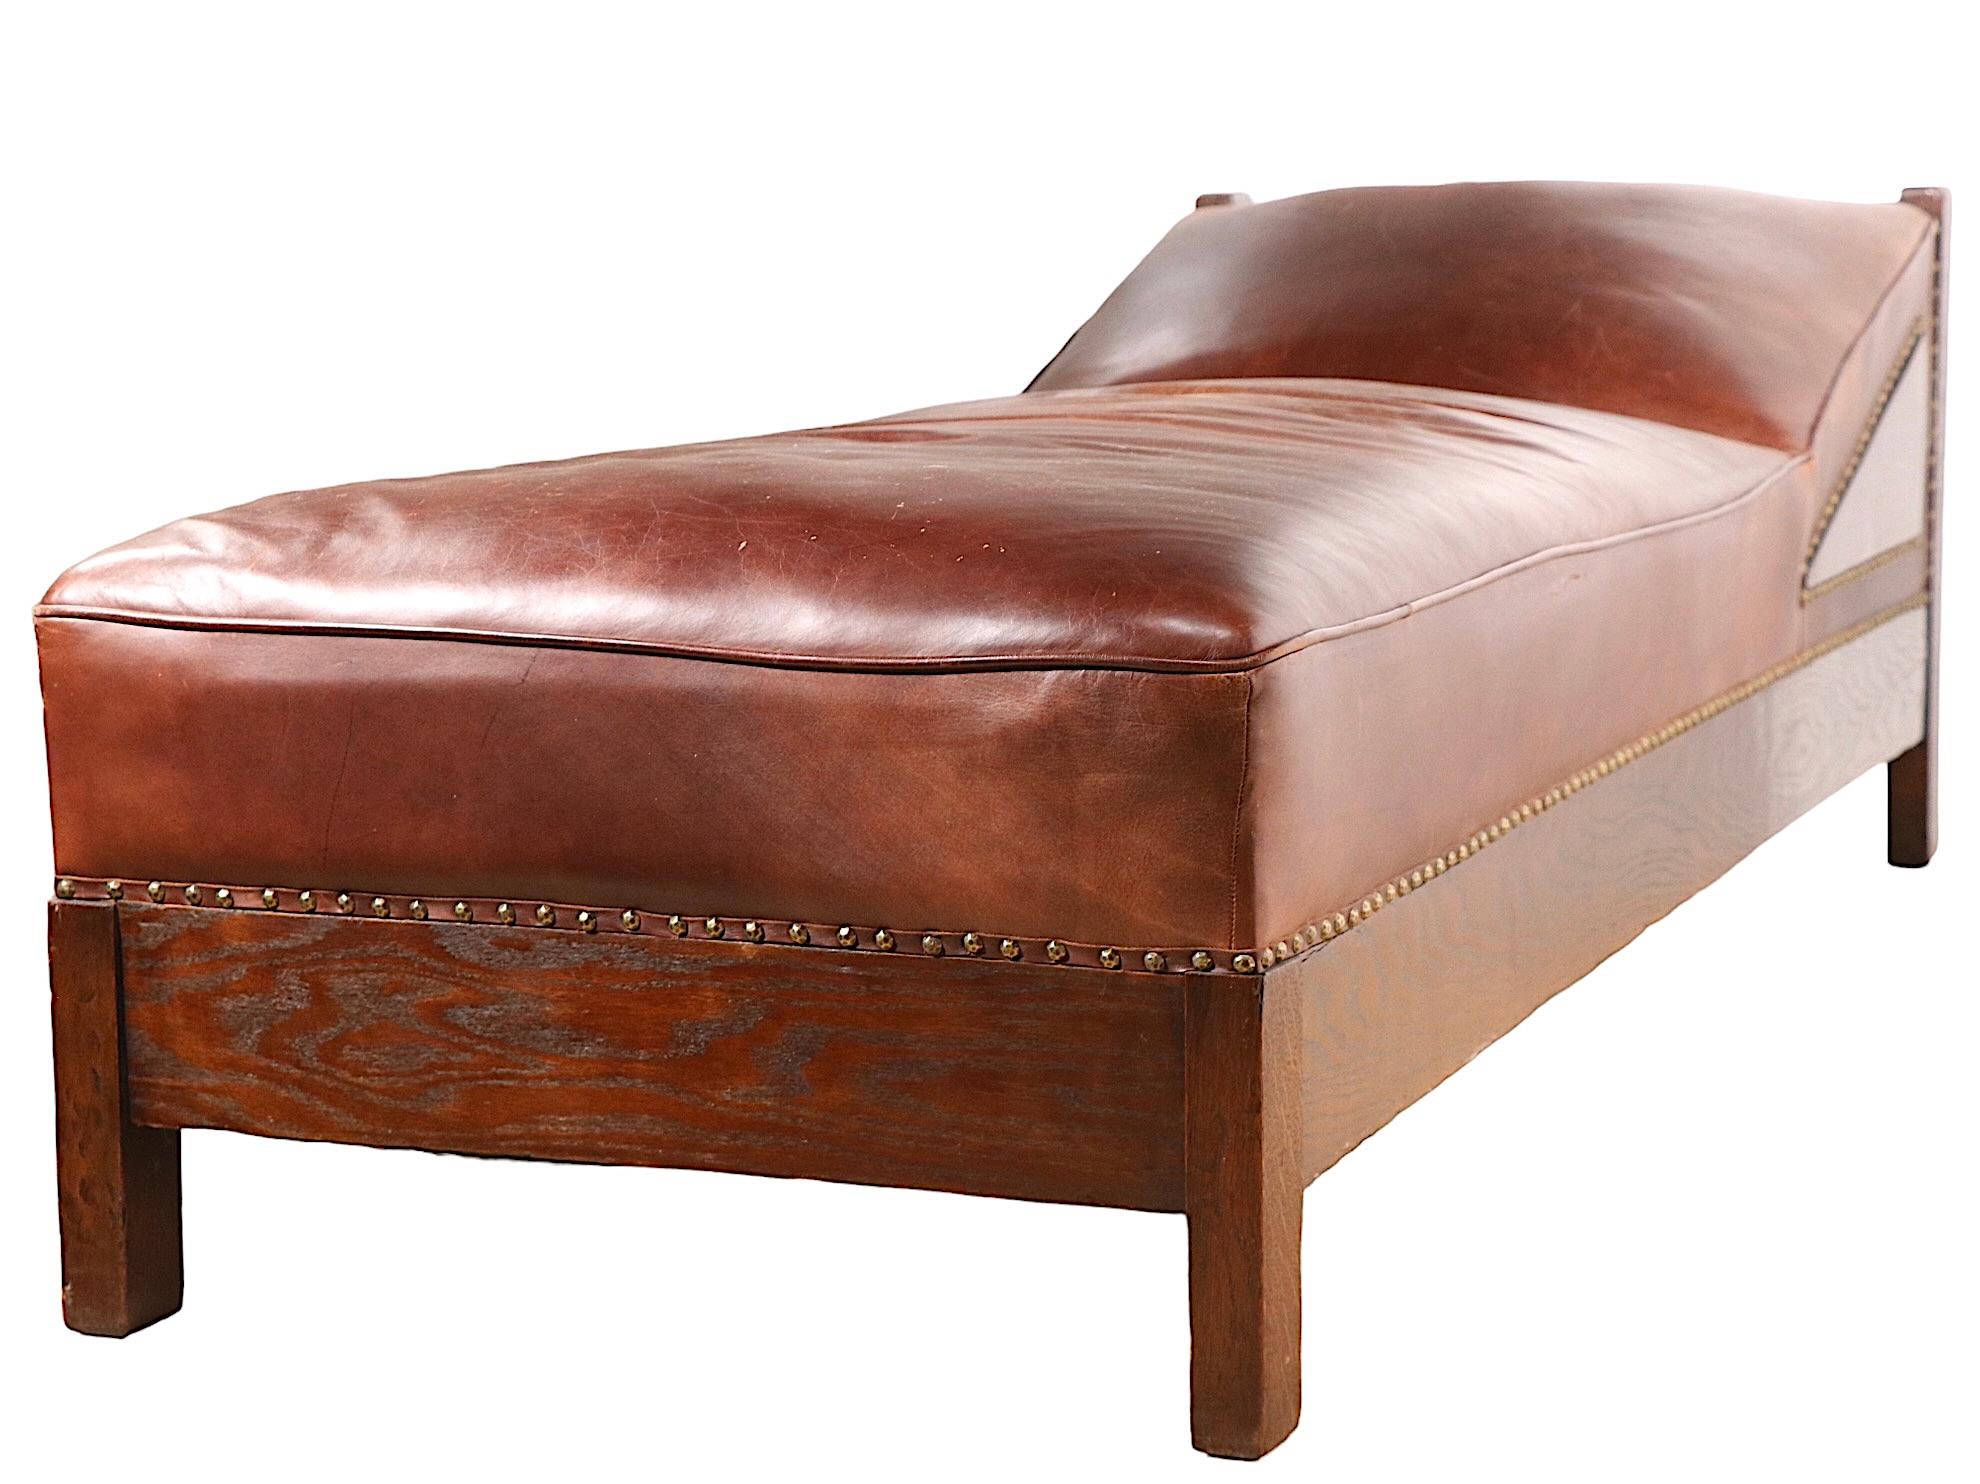 Oak and Leather Arts and Crafts Mission Daybed Chaise Lounge c. 1900 -1920's In Good Condition In New York, NY